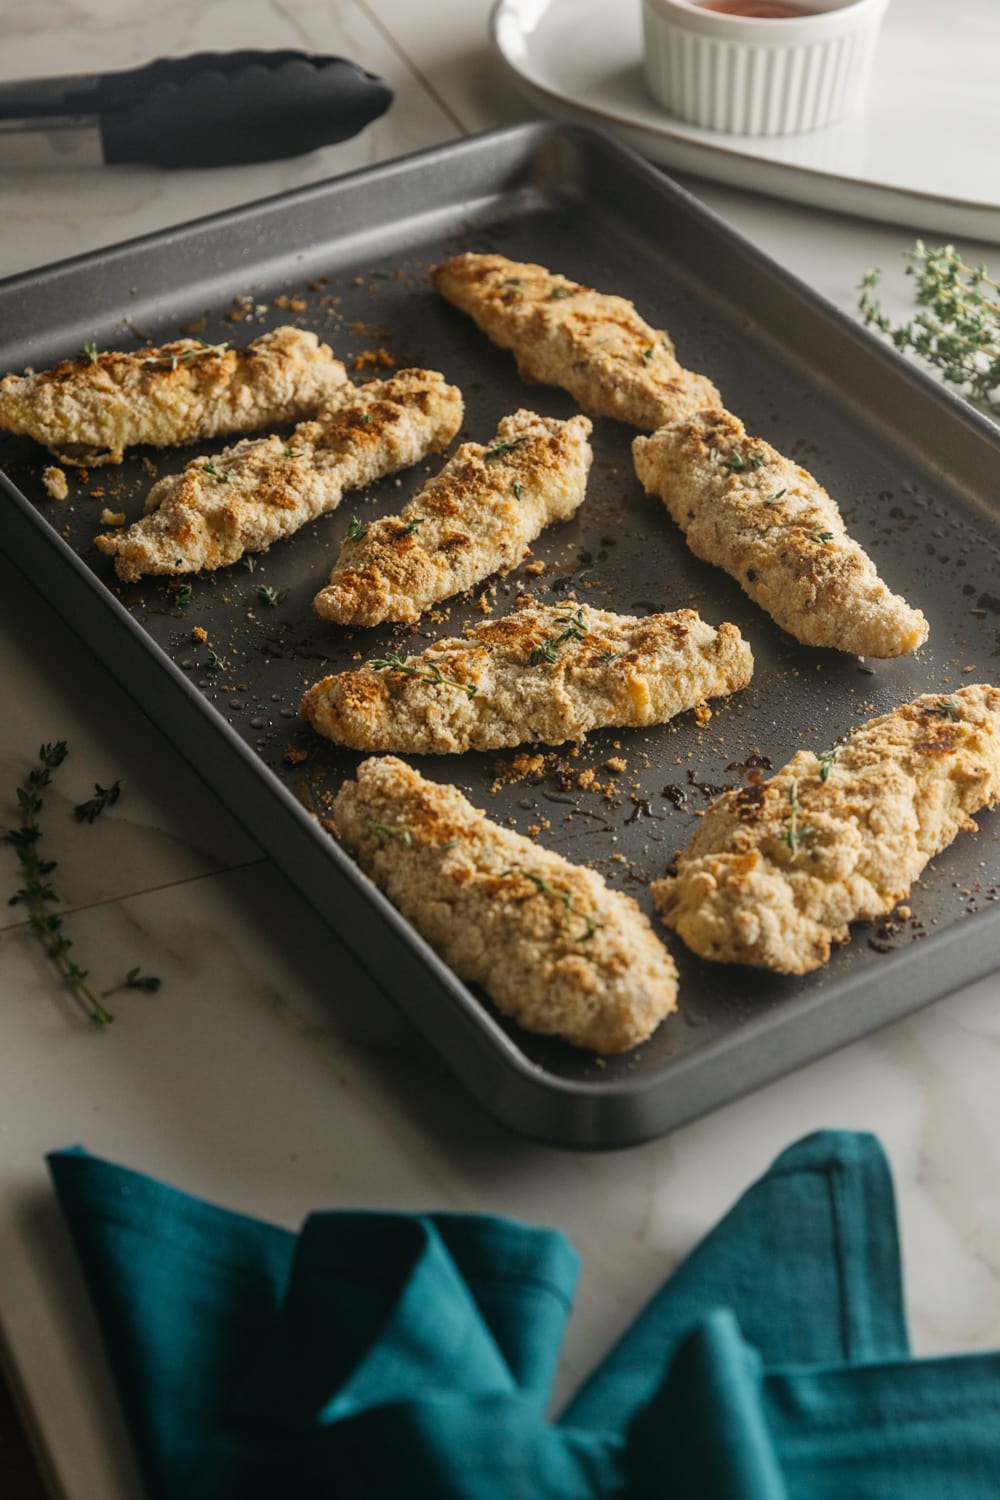 Baked Keto Chicken Tenders - Just 2g Carbs! - KetoConnect